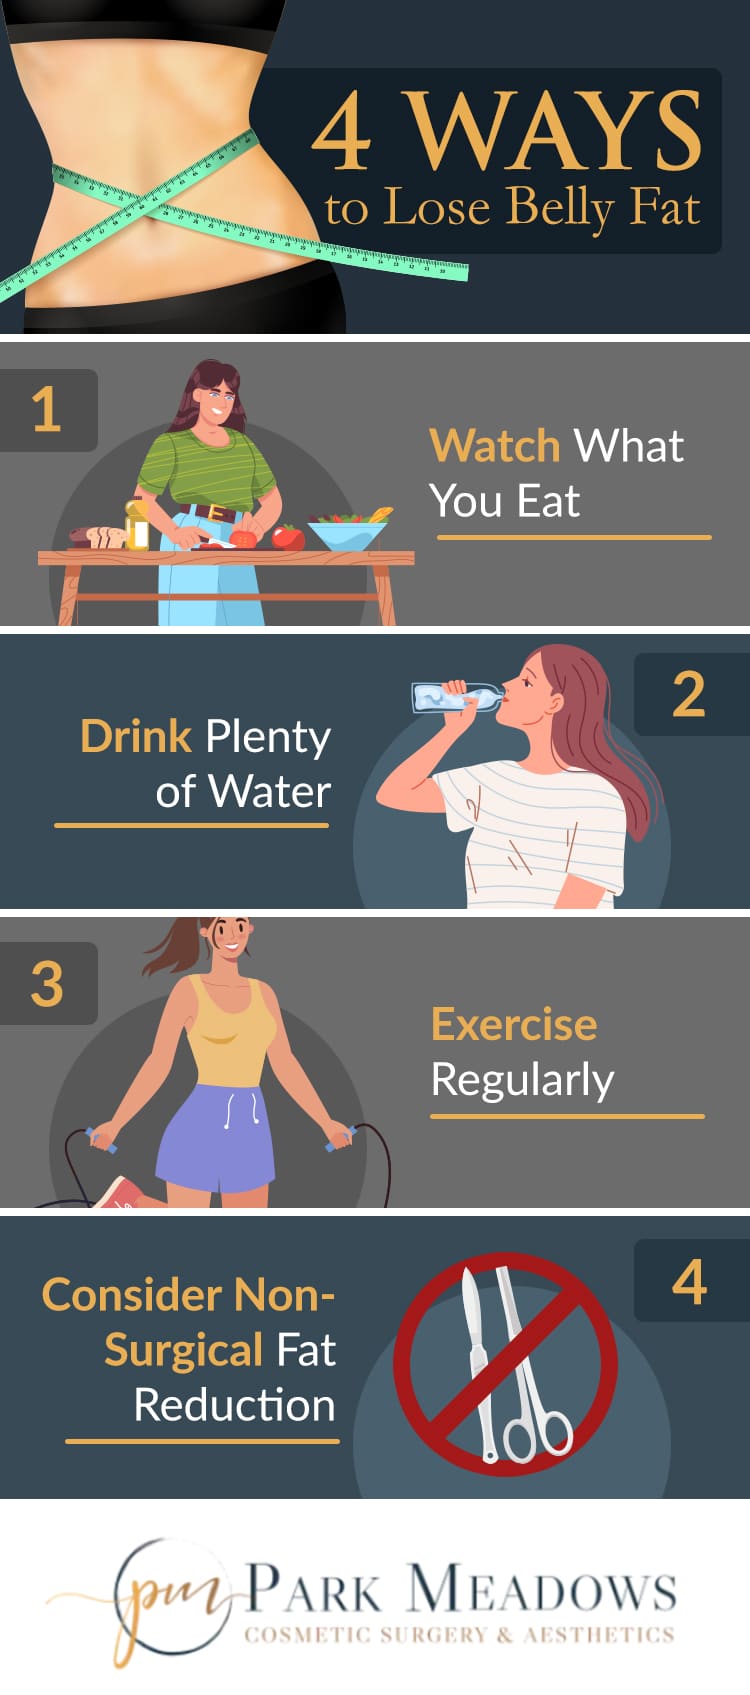 Ways to lose belly fat infographic